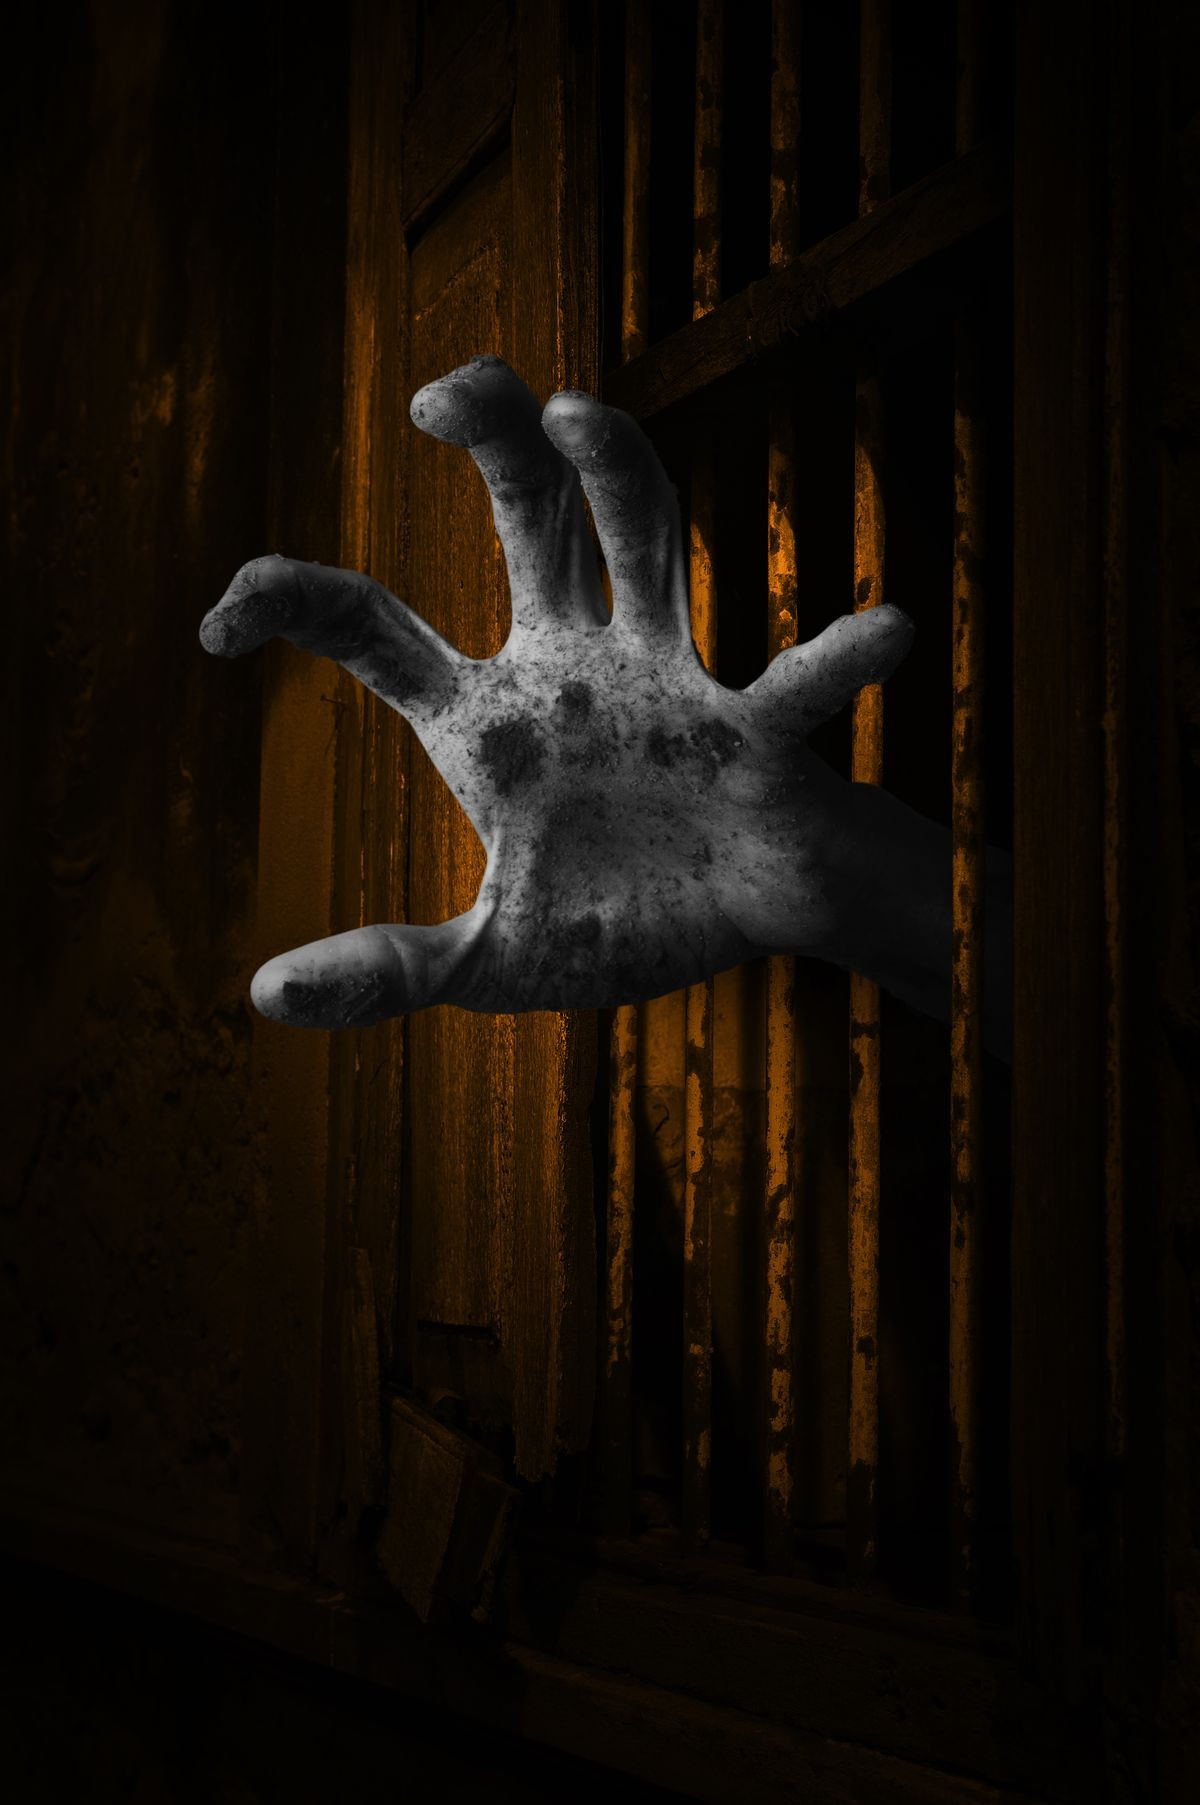 Zombie hand rising out from the old window ancient house, Halloween concept